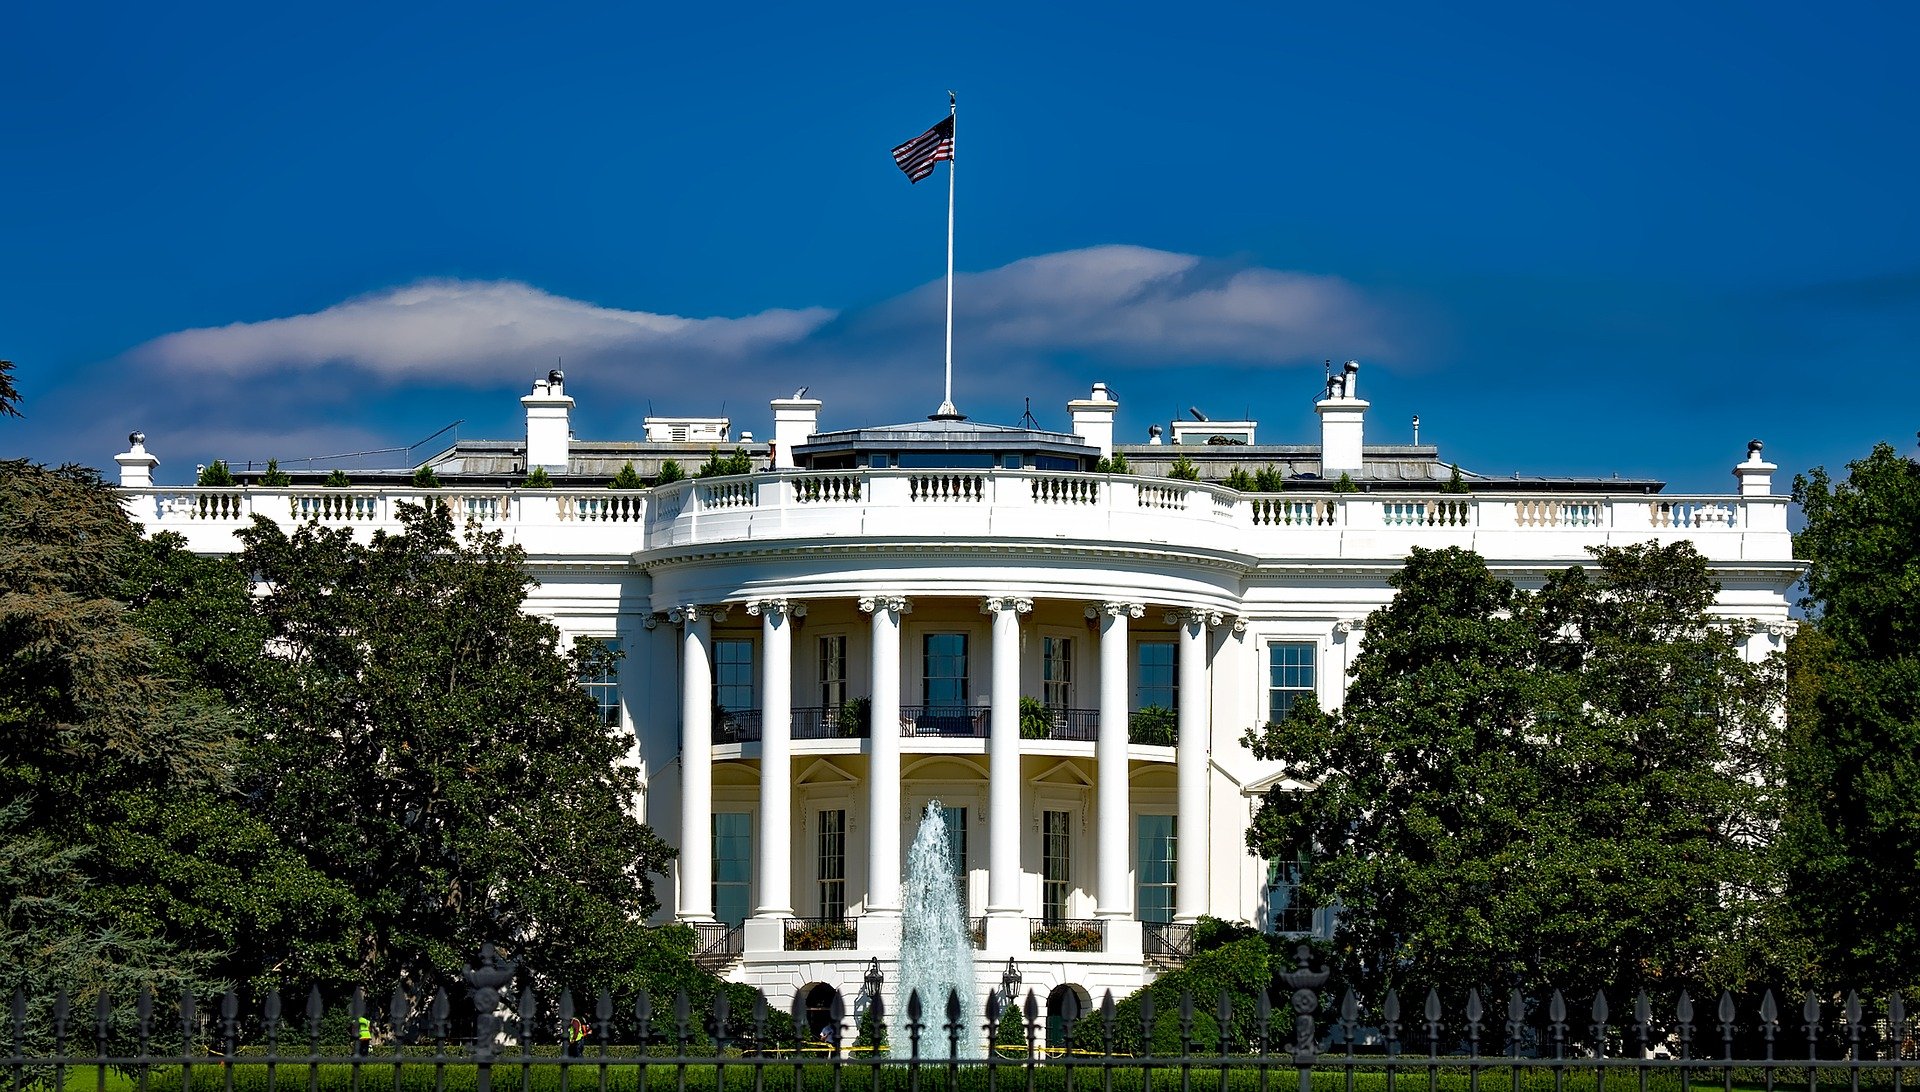 Two People Arrested On Weapons Charges Near The White House